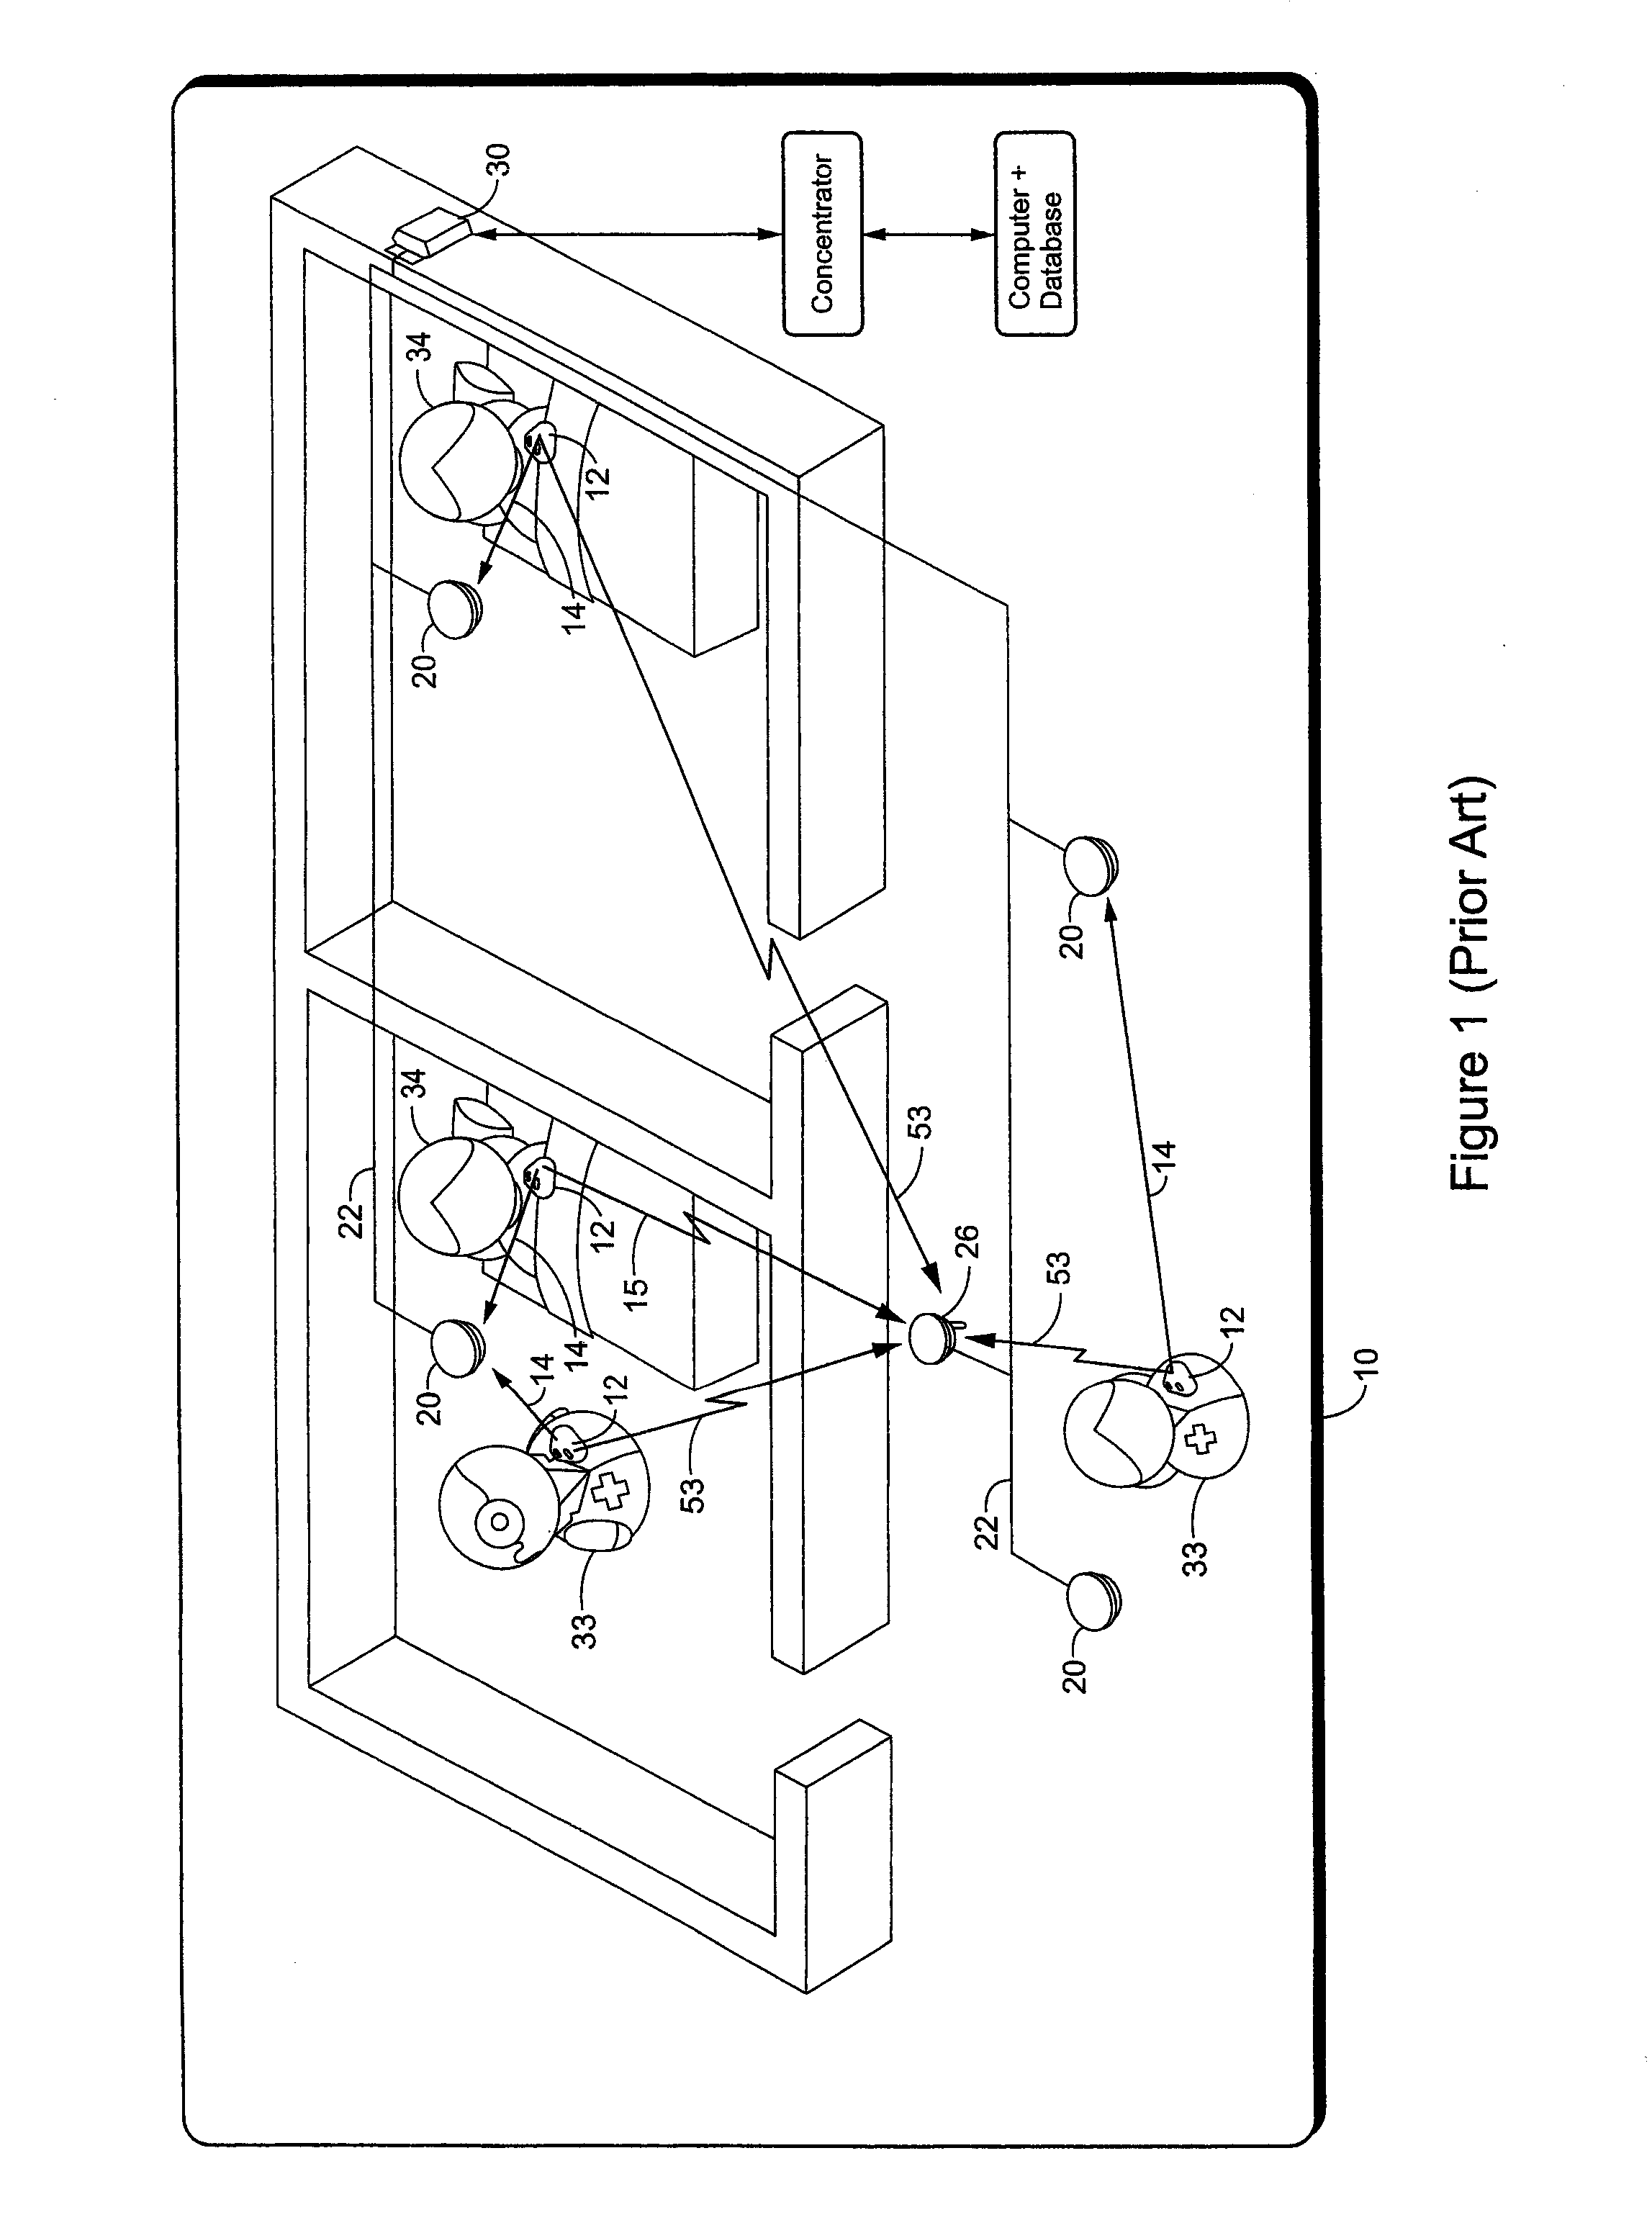 Real-time method and system for monitoring hygiene compliance within a tracking environment